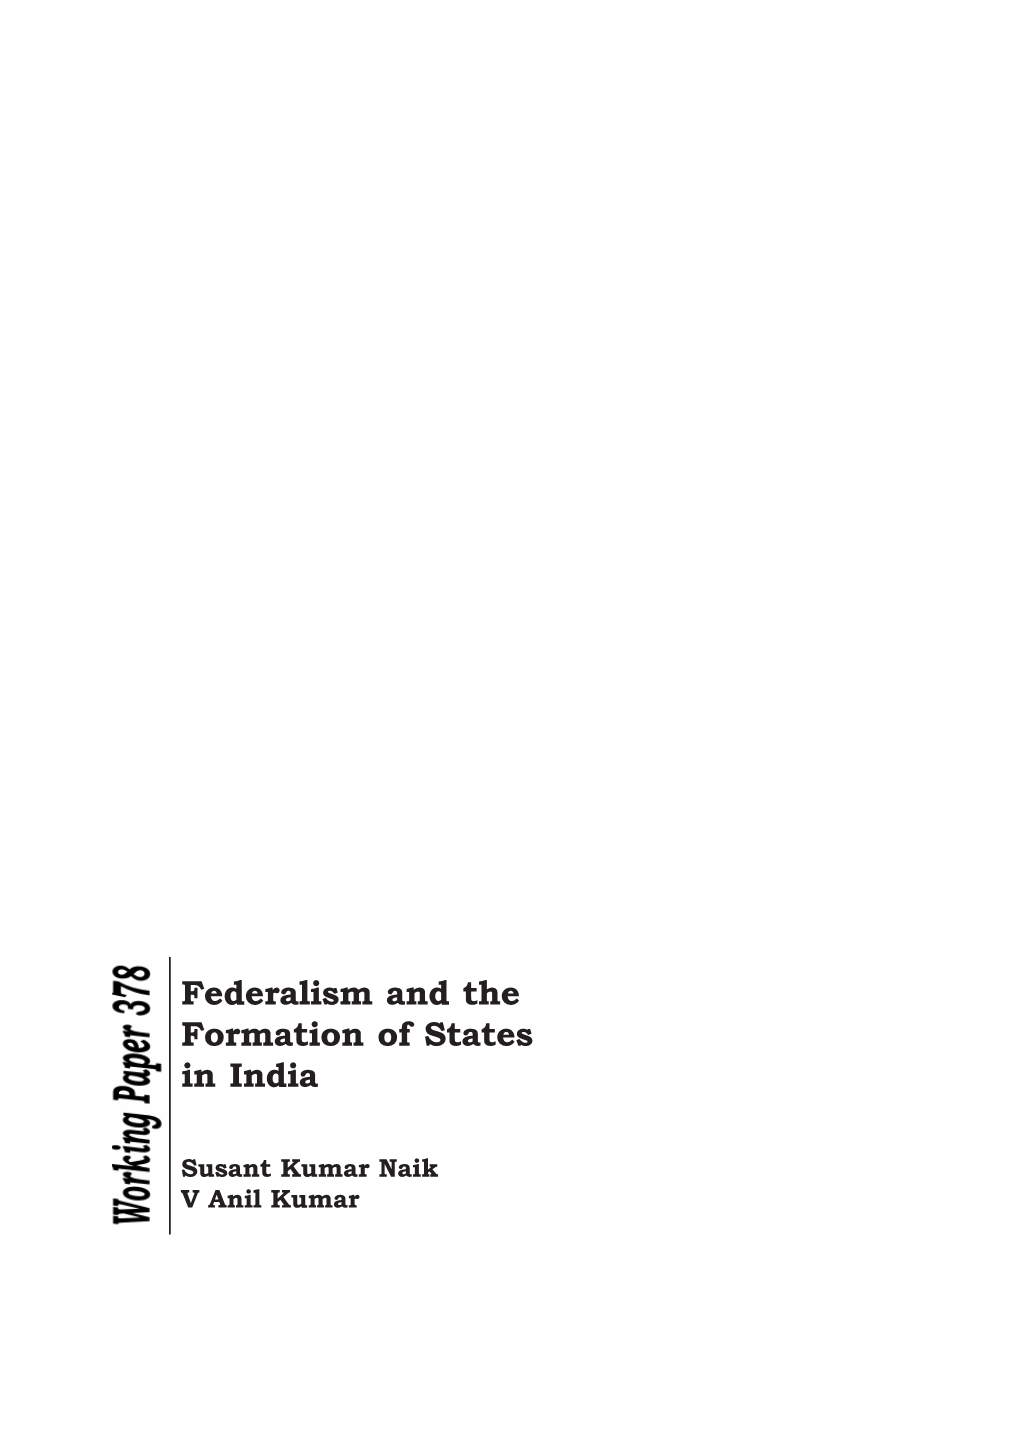 Federalism and the Formation of States in India